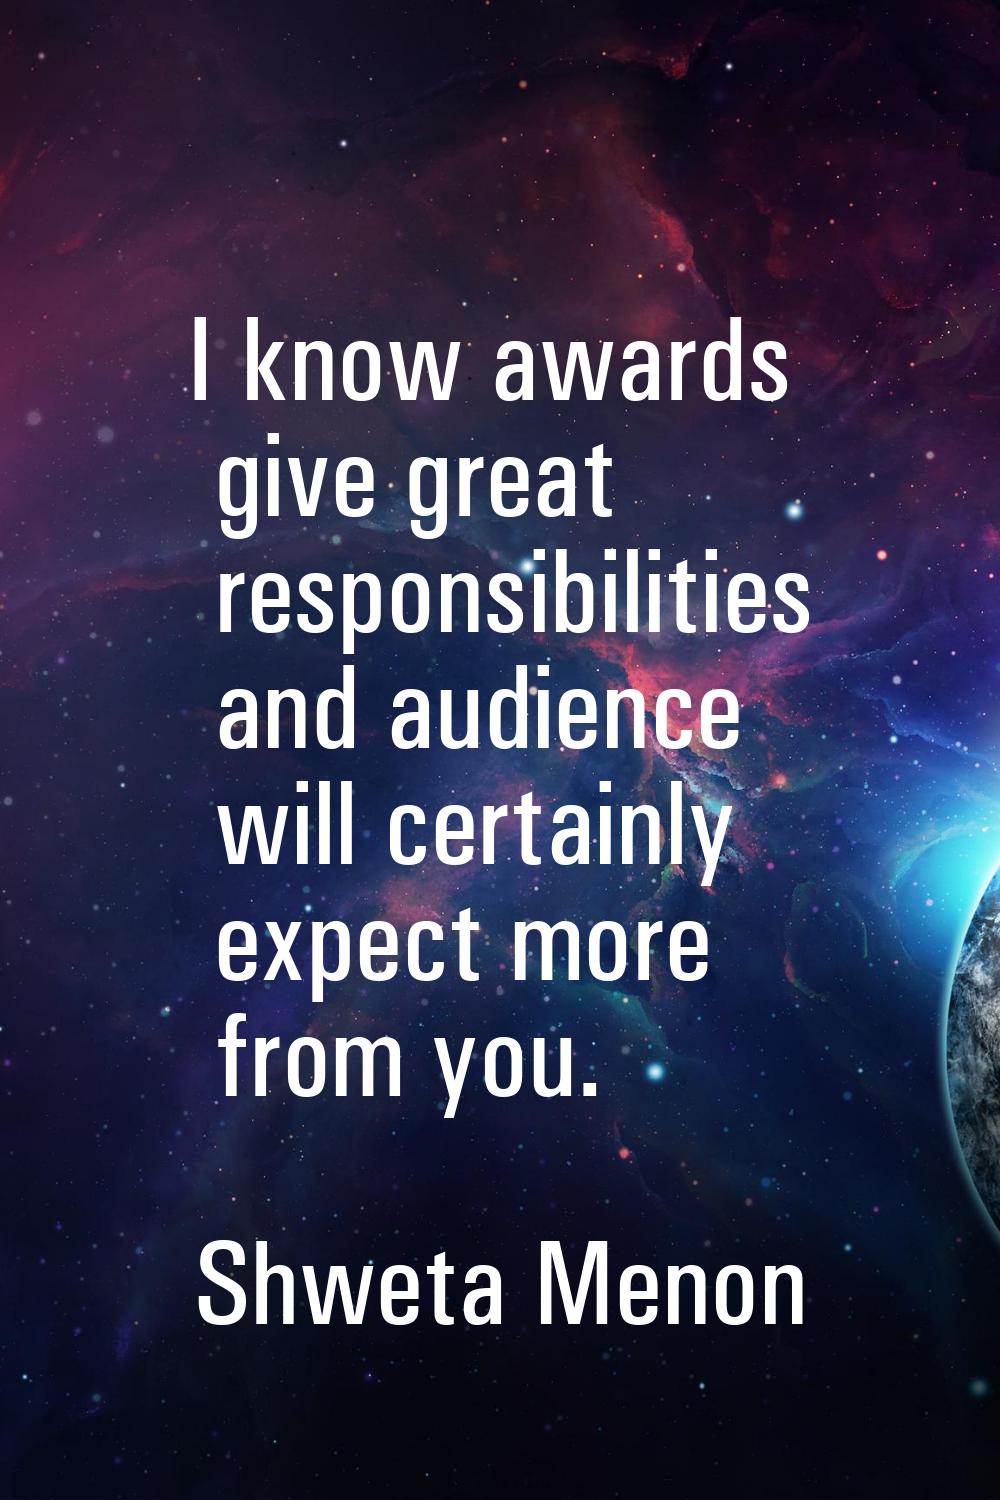 I know awards give great responsibilities and audience will certainly expect more from you.